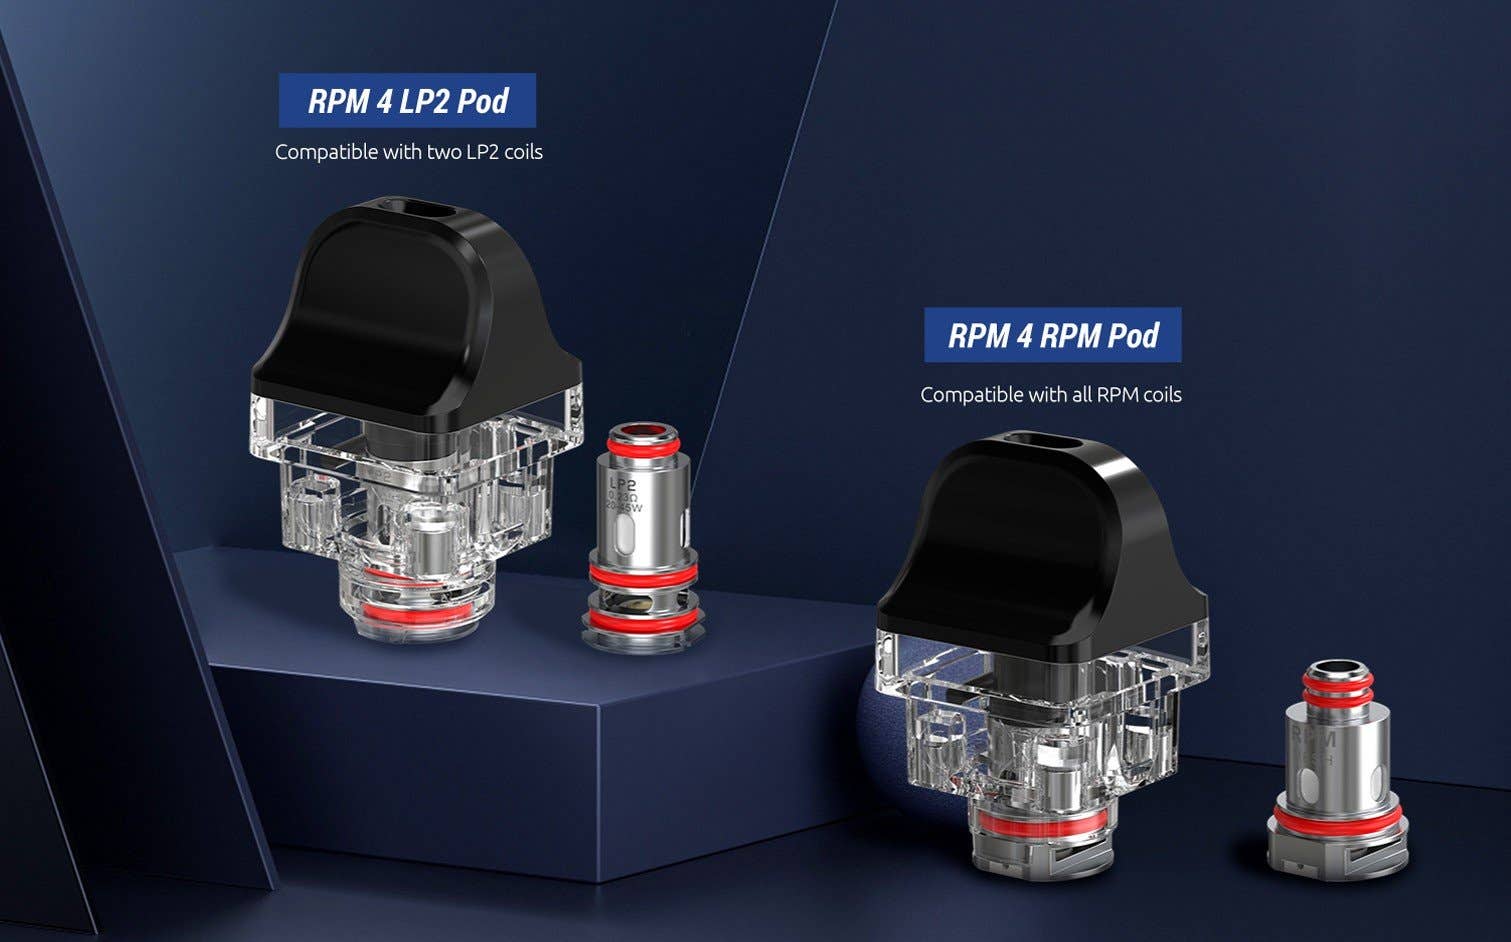 RPM4 has two styles of replaceable pods which take a huge range of coil options